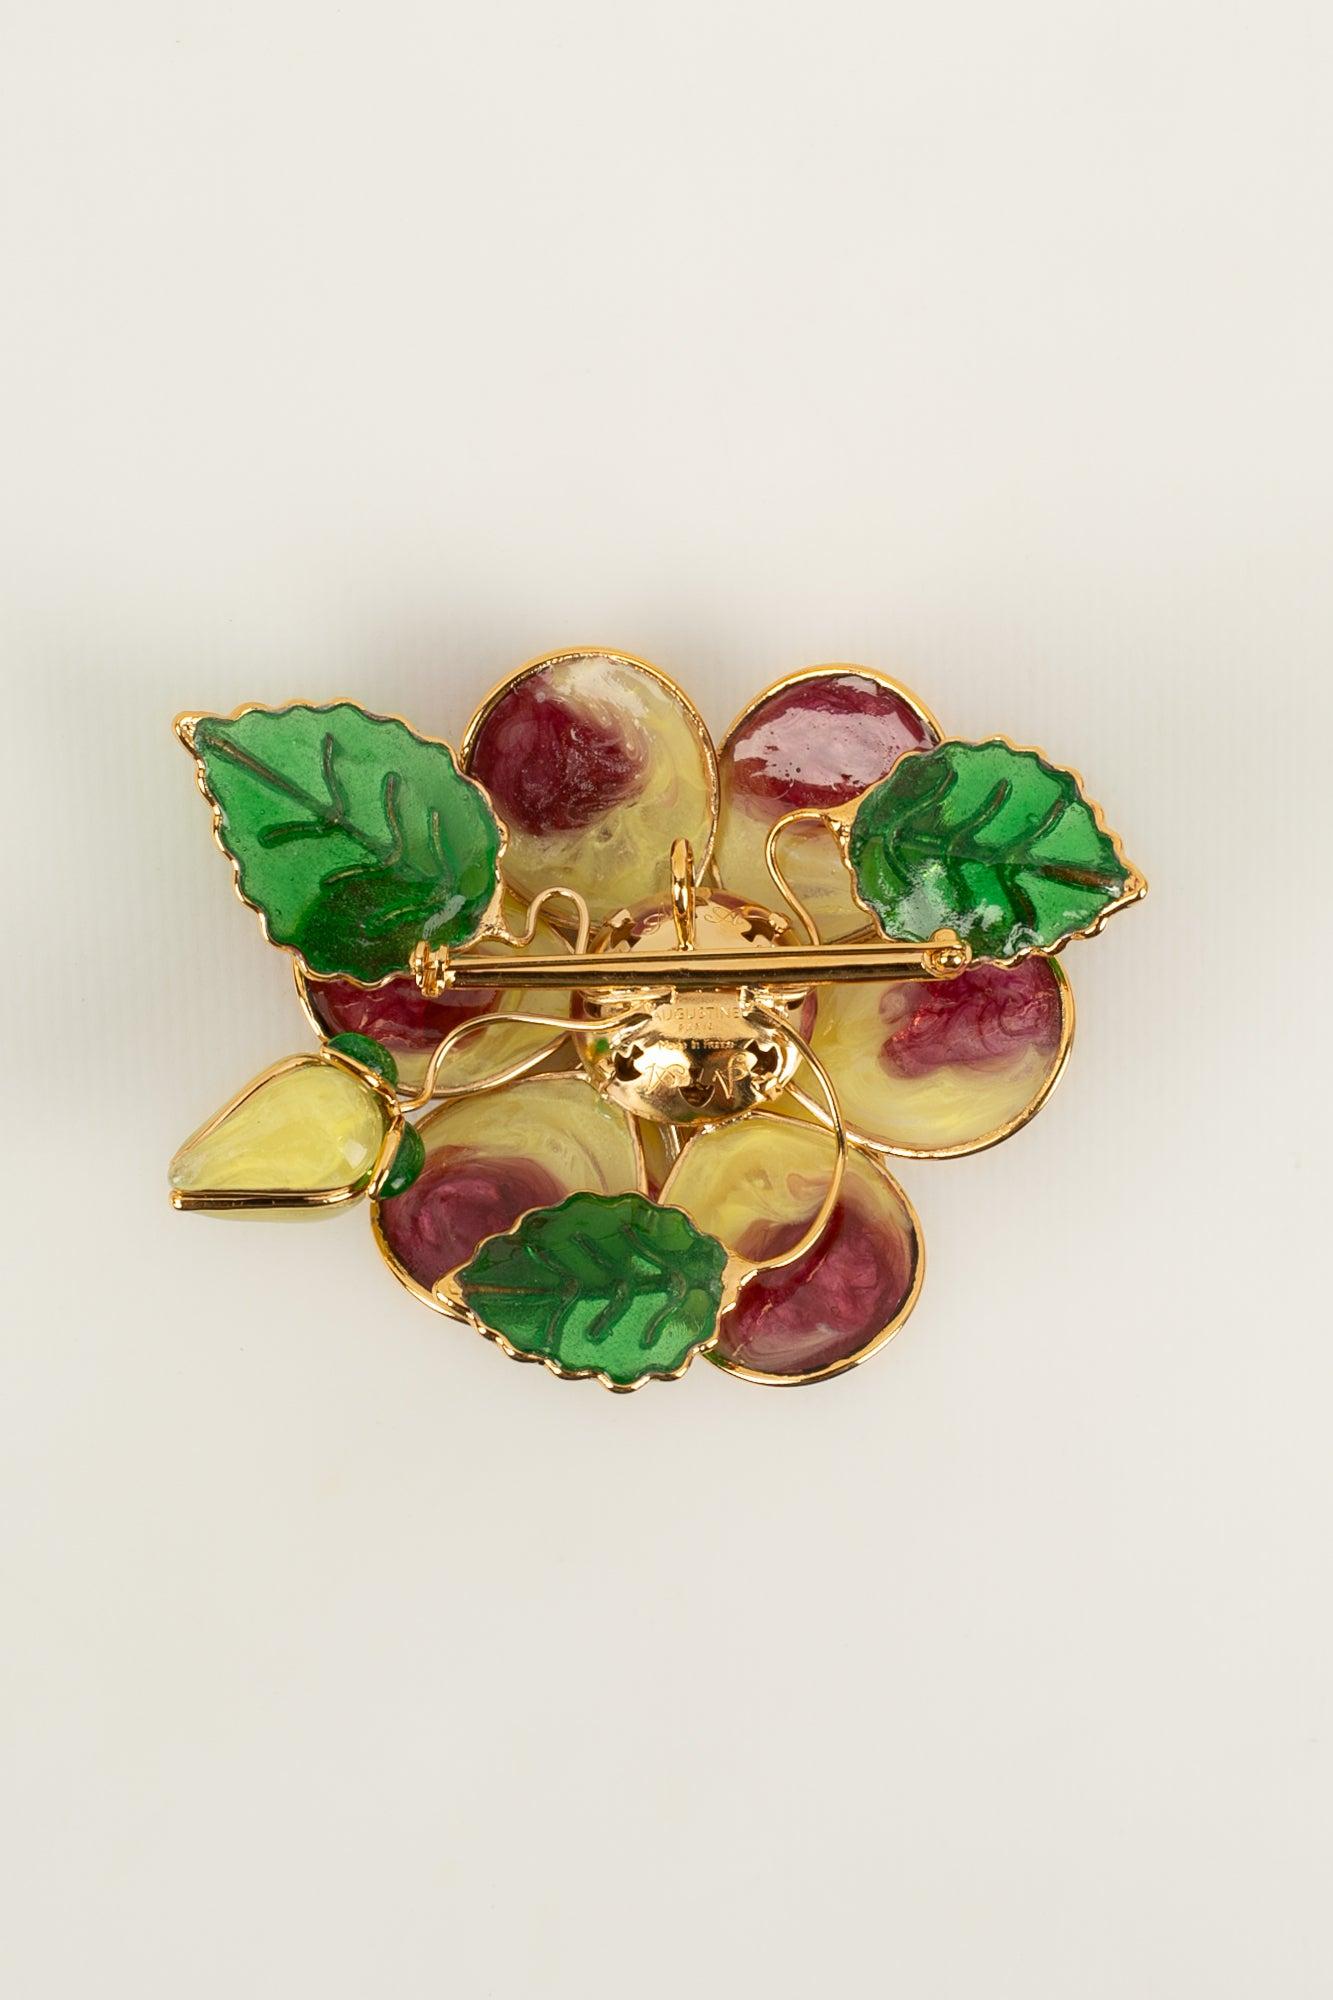 Augustine - (Made in France) Brooch / pendant in gold-plated metal and glass paste in yellow and red tones representing a flower.

Additional information:
Condition: Very good condition
Dimensions: 6.5 cm x 7.5 cm

Seller Reference: BR142
